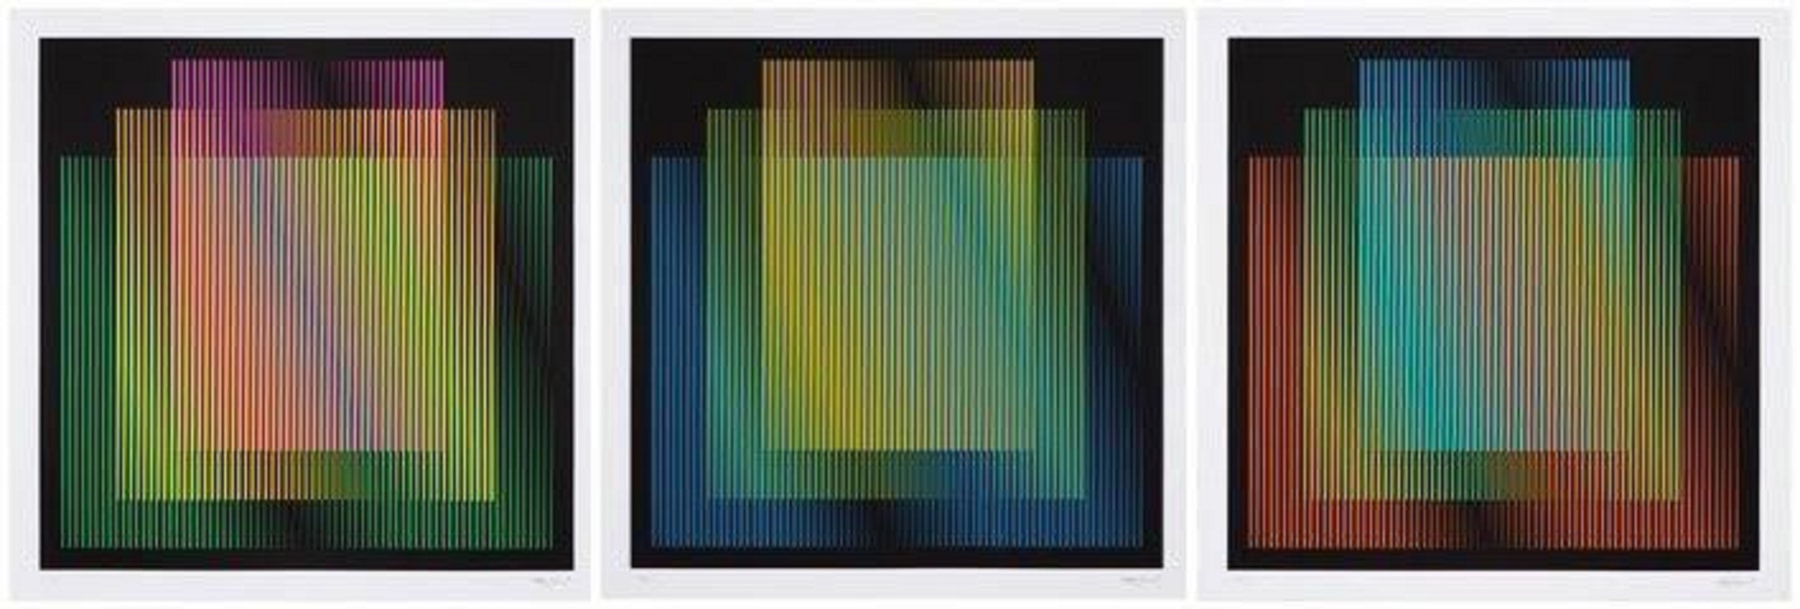 Couleur Additive Germania Harmonie A,B,C
Carlos Cruz-Diez, 2018

Portfolio, Silkscreen
39 3/8&amp;quot; x 39 3/8&amp;quot; (100 cm x 100 cm) each
Edition of 50
$16,000 (Individual Print $6,000)

Printed by Edition Domberger, Stuttgart, Germany
Published by Harvey Bayer Fine Art

INQUIRE